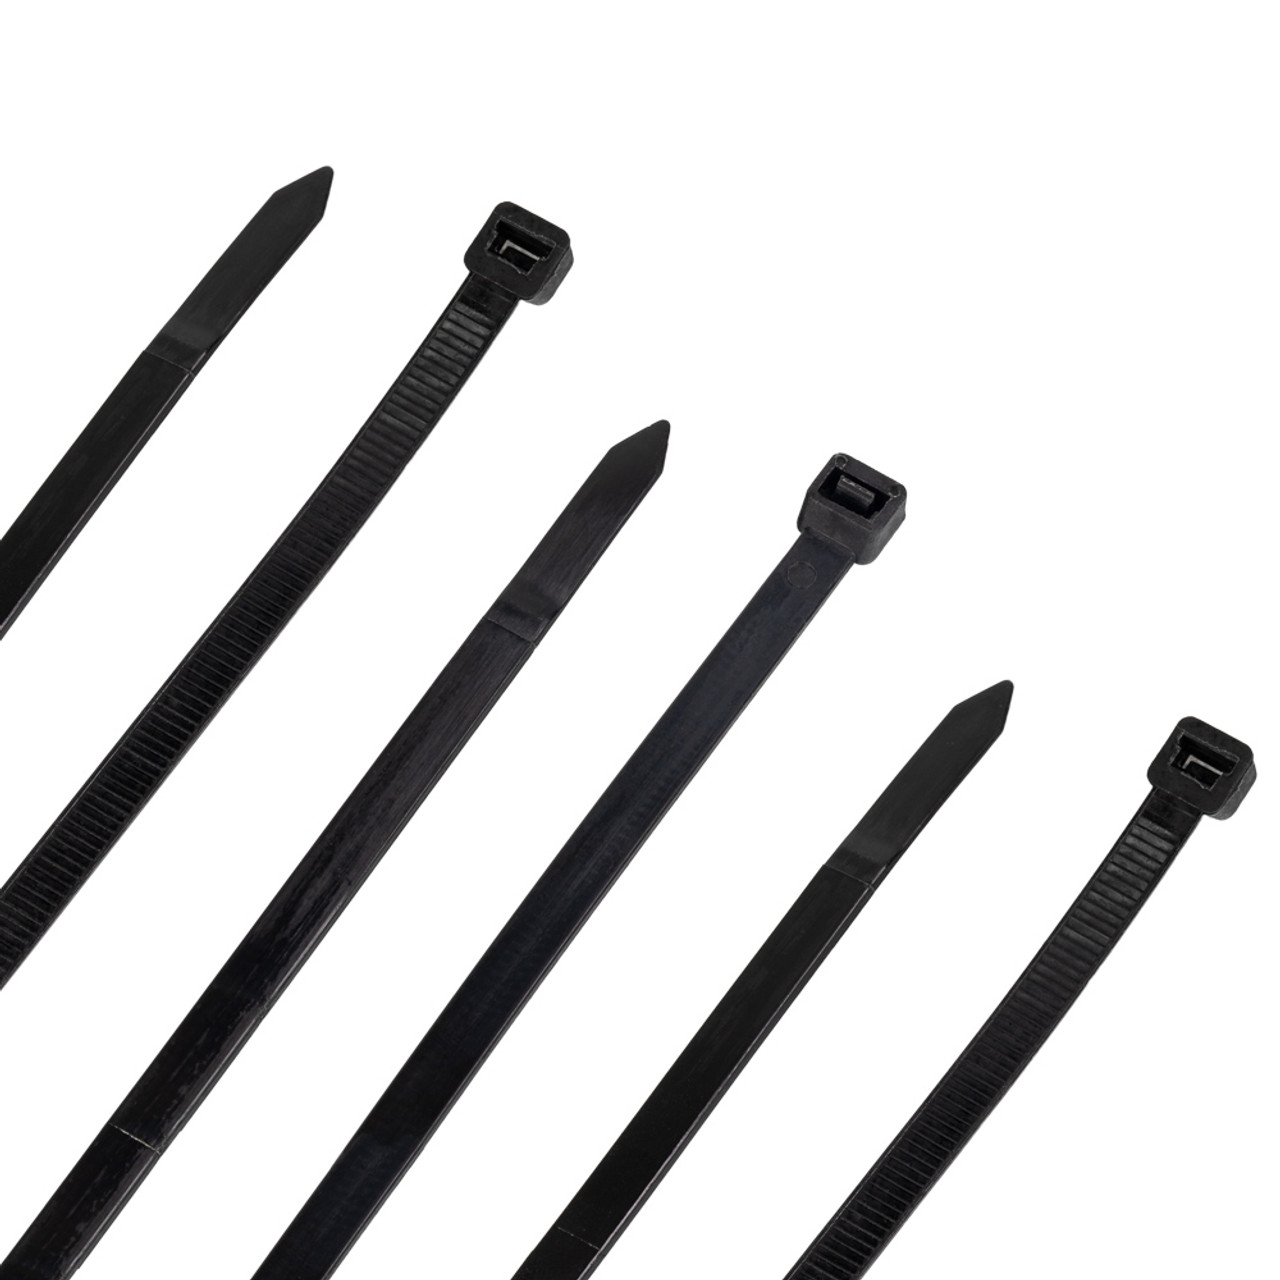 NavePoint 6 Inch Nylon Black Cable Ties 120 Lbs - 100 Pack